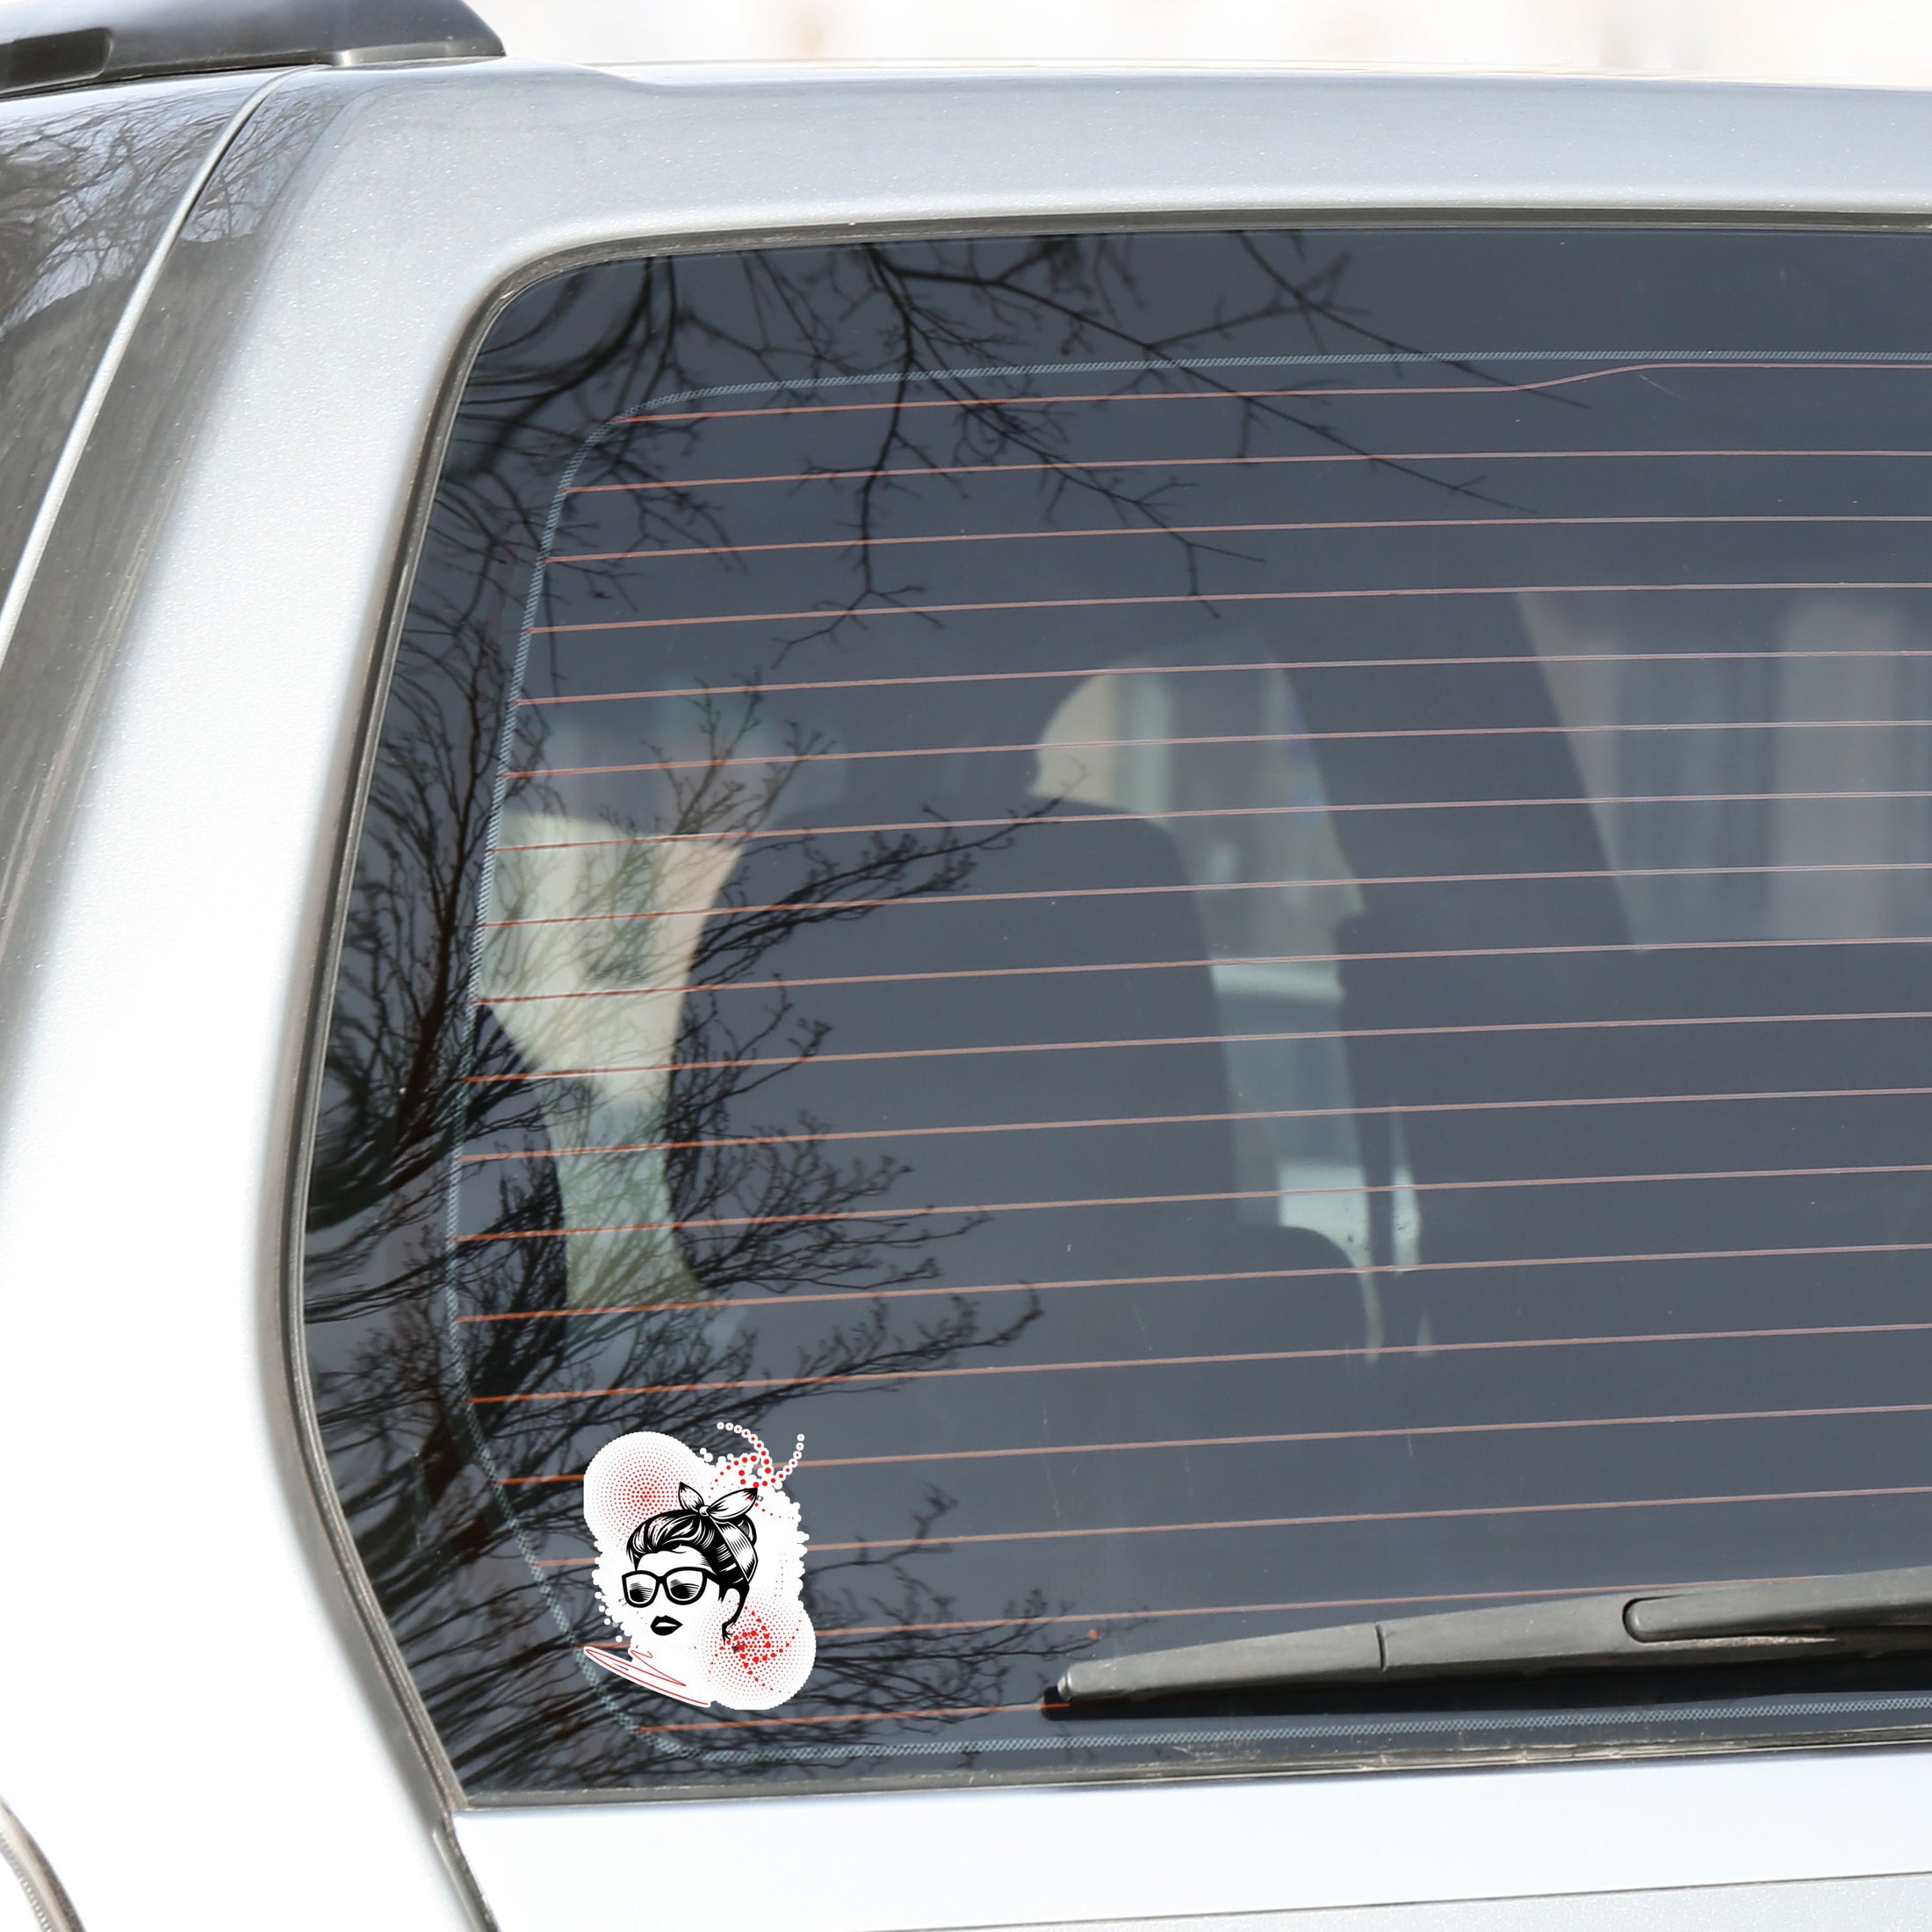 Trash Polka uses red, black, and white with a combination of abstract, surrealistic, and realistic images, and this individual die-cut sticker features a woman wearing sunglasses with her hair tied up on a white background with red swirls. This image shows the trash polka woman sticker on the back window of a car.